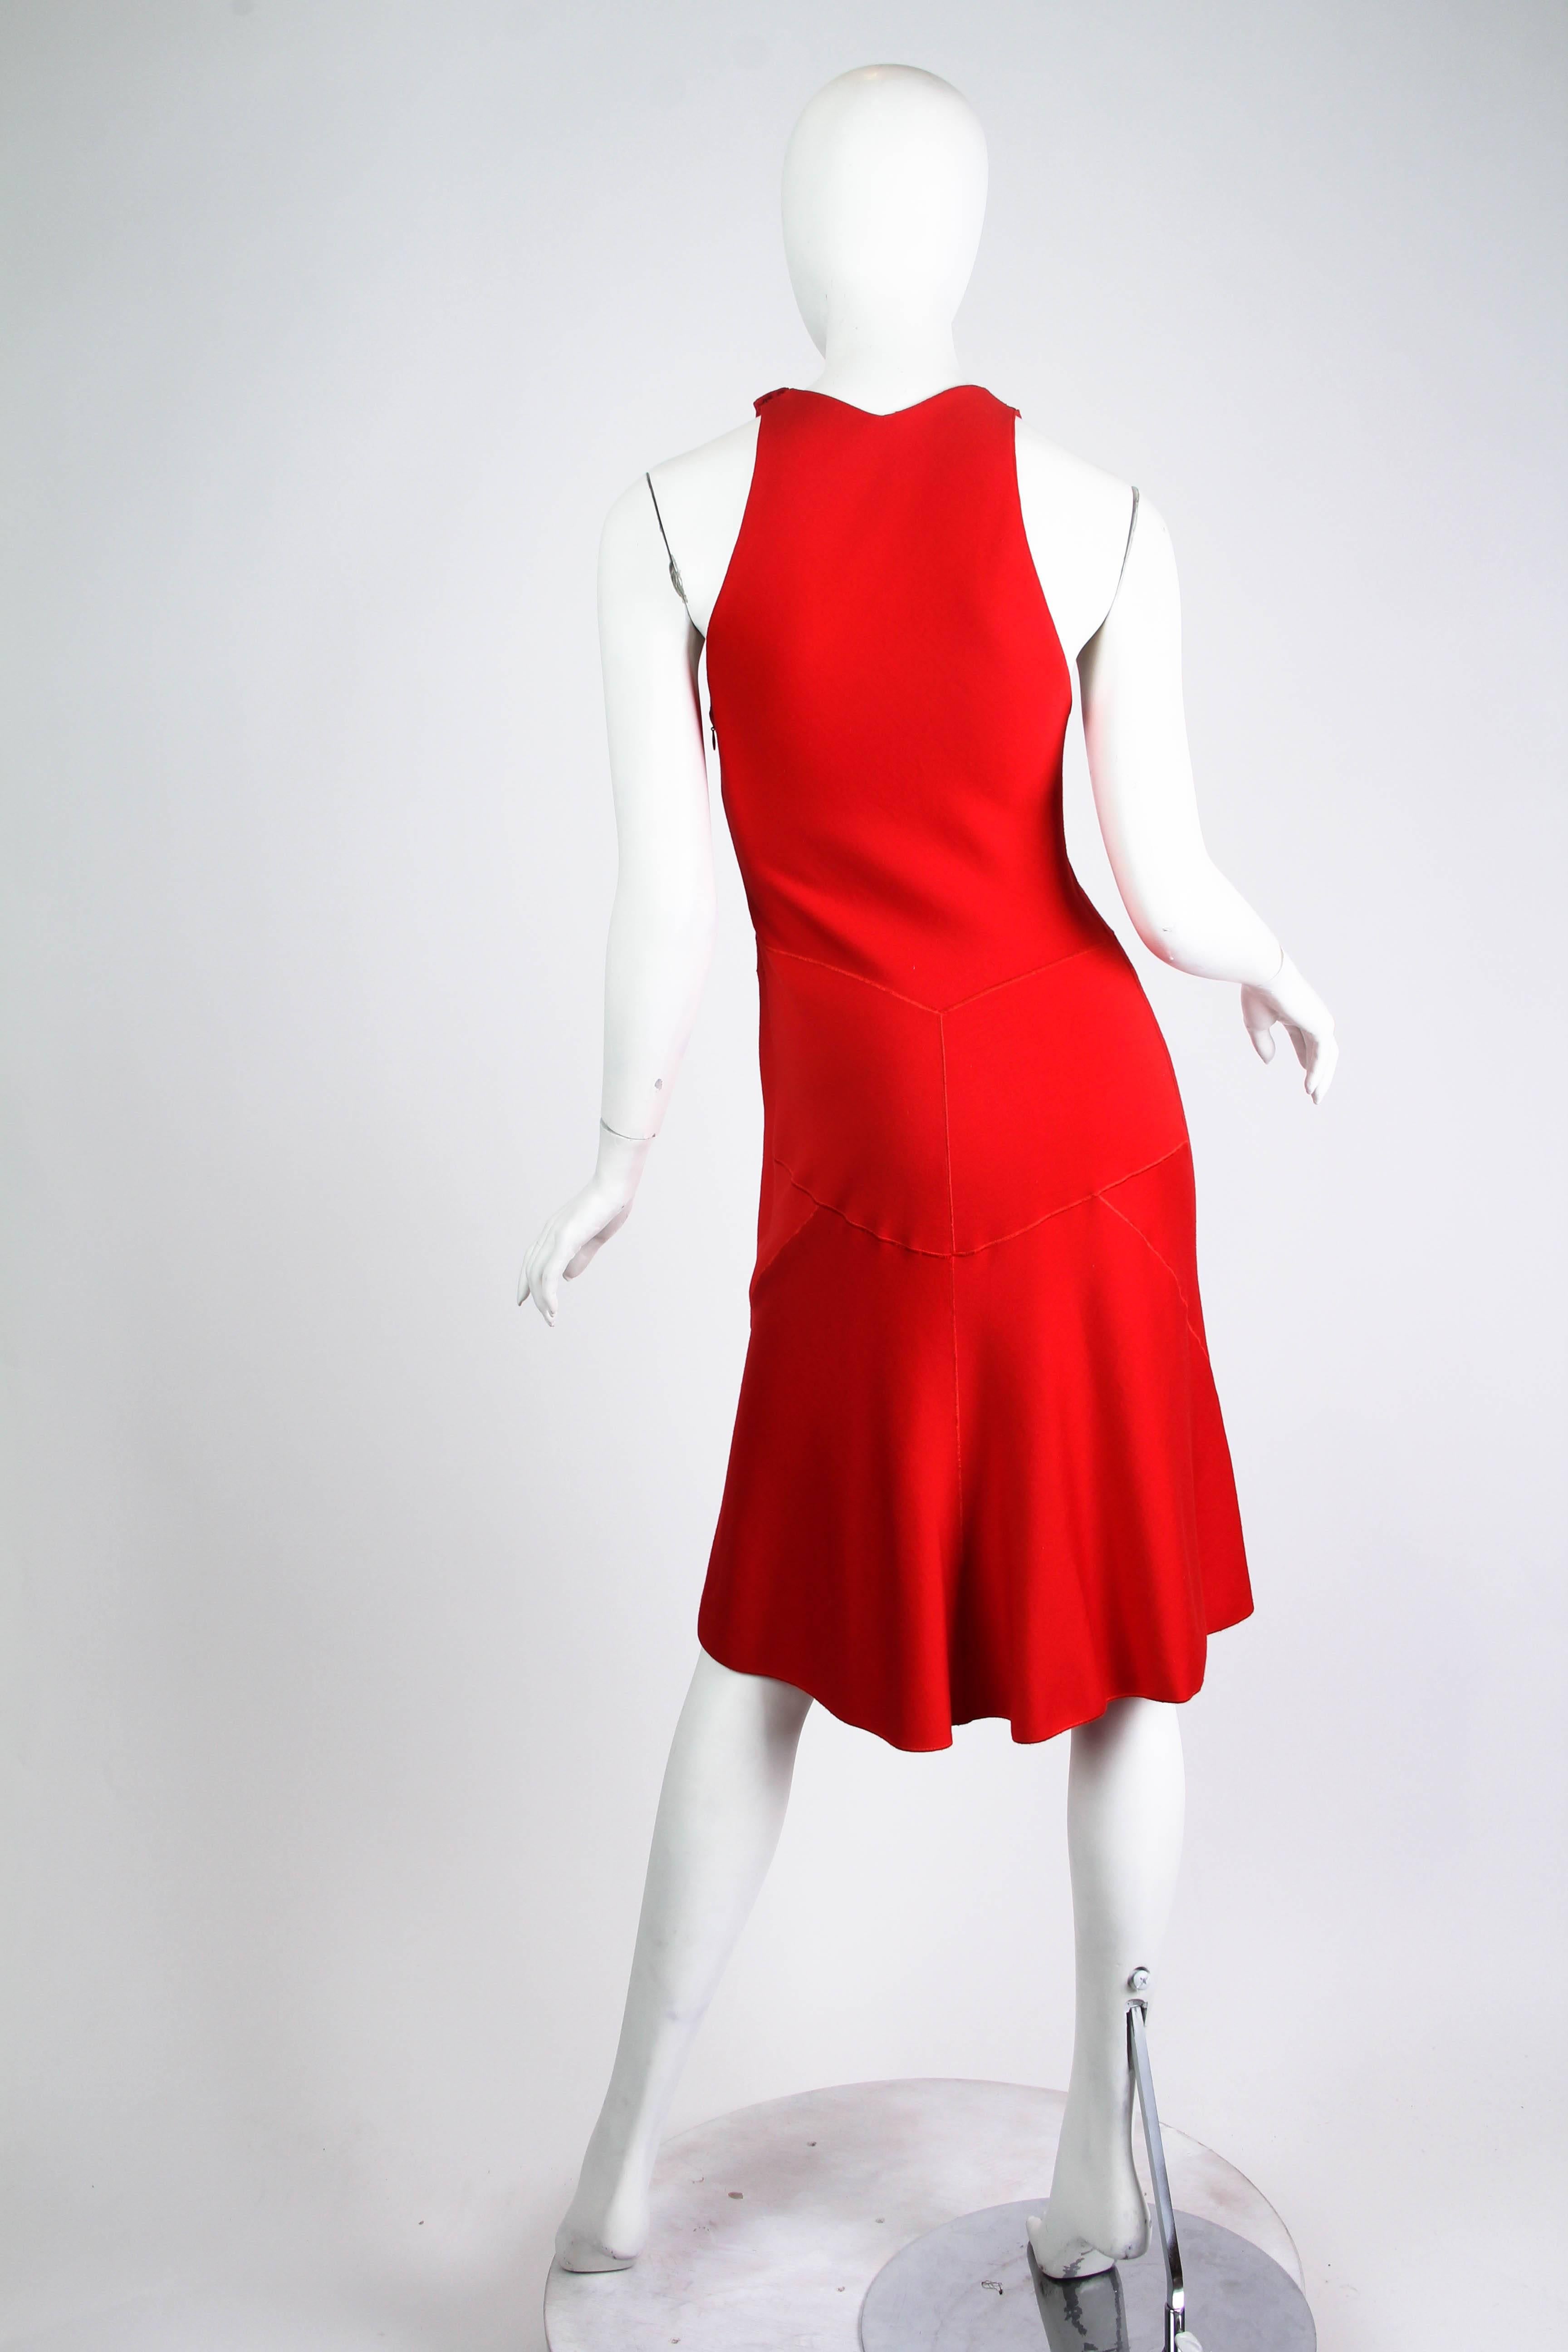 Women's Alaia Dress in very rare to find Red